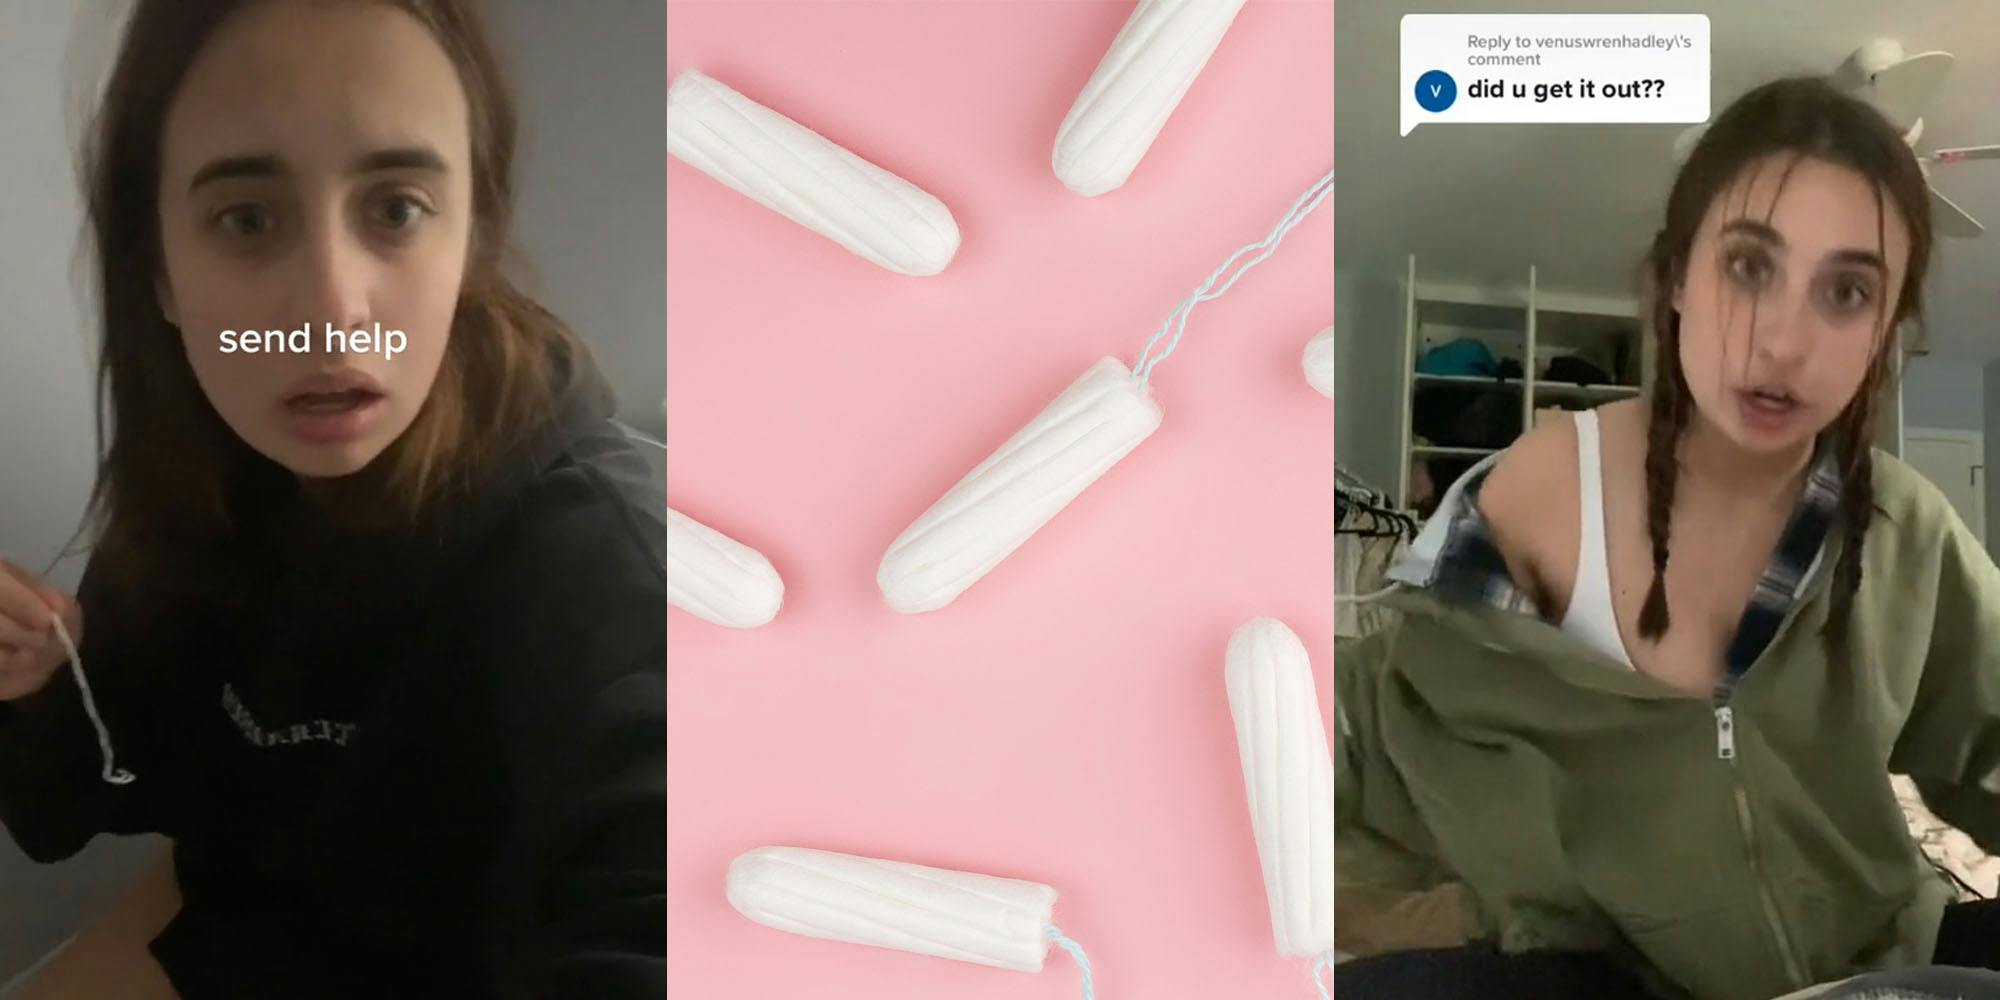 Woman on toilet holding tampon string worried caption "send help" (l) tampons on pink background (c) Woman in hoodie on bed talking caption "did you get it out??" (r)